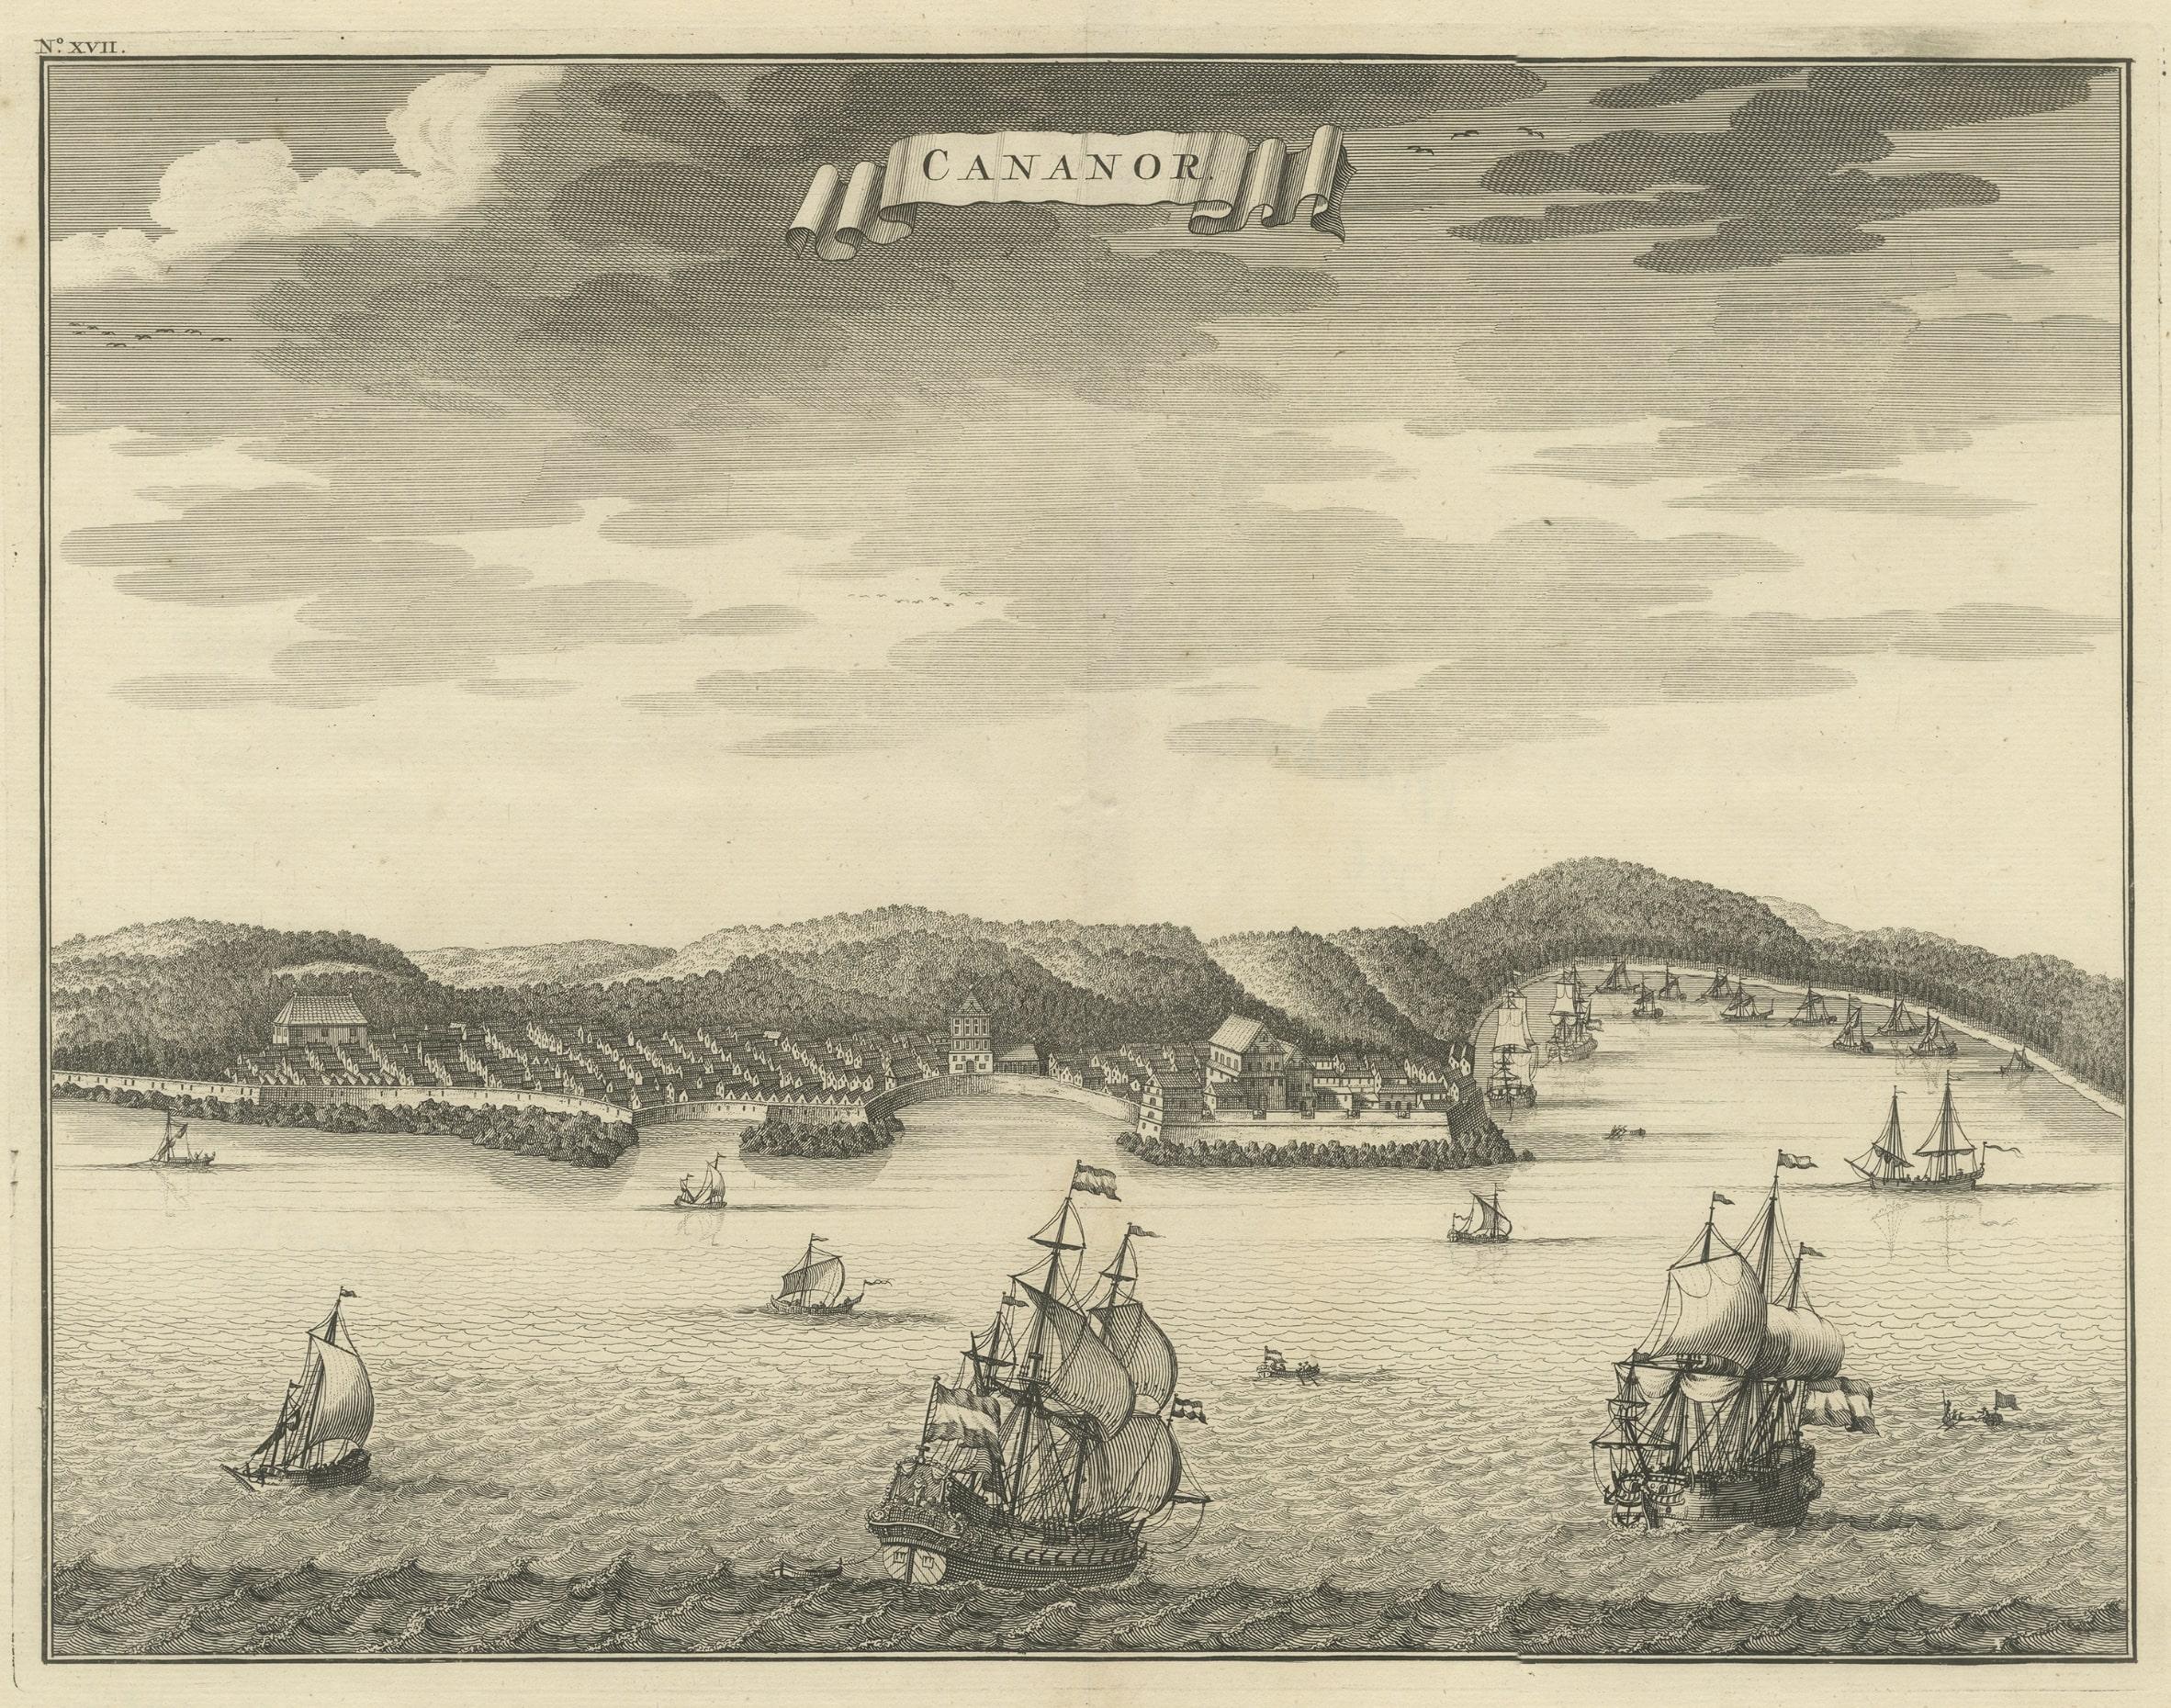 Antique print, titled: 'Cananor' - This is a print of a view of Kannur (or Cannanore), Kerala, India. From the monumental: 